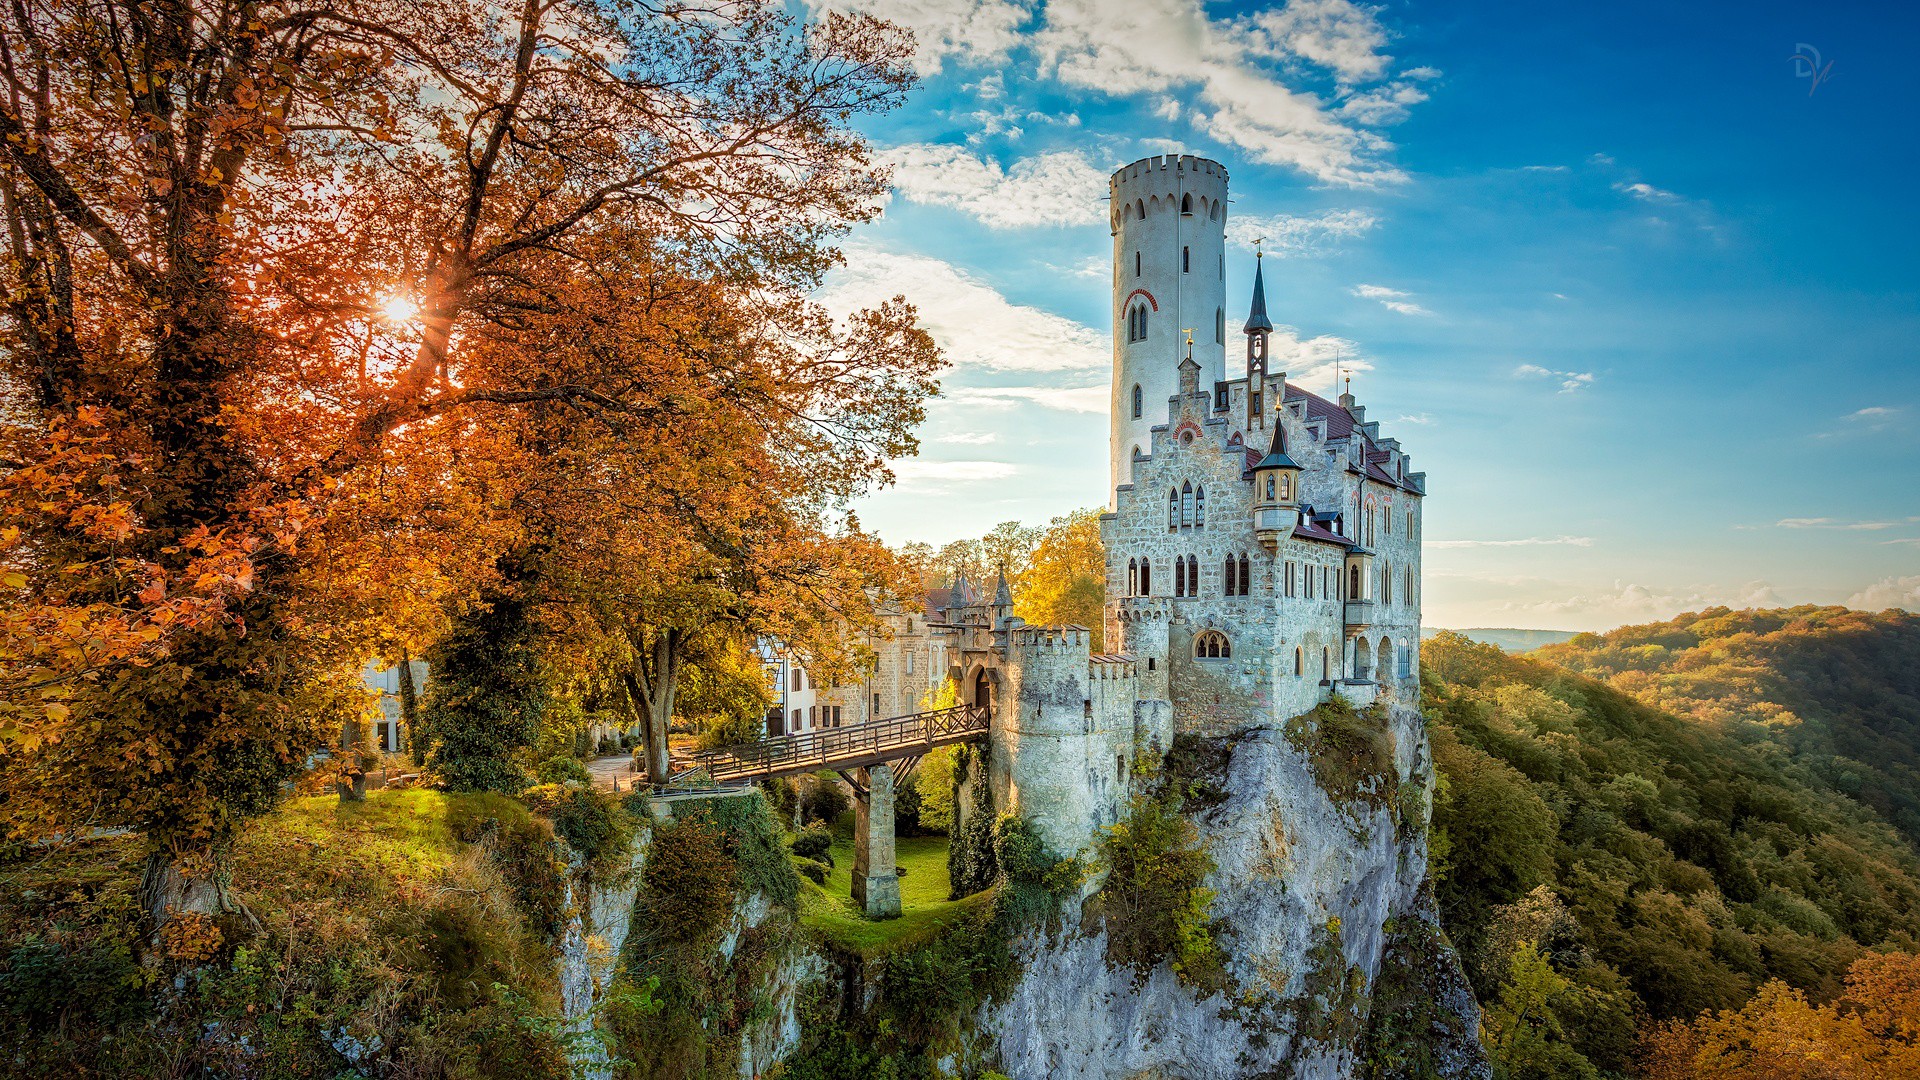 General 1920x1080 landscape HDR nature cliff fall trees sunlight castle architecture building old building tower bridge forest Germany Castle Lichtenstein